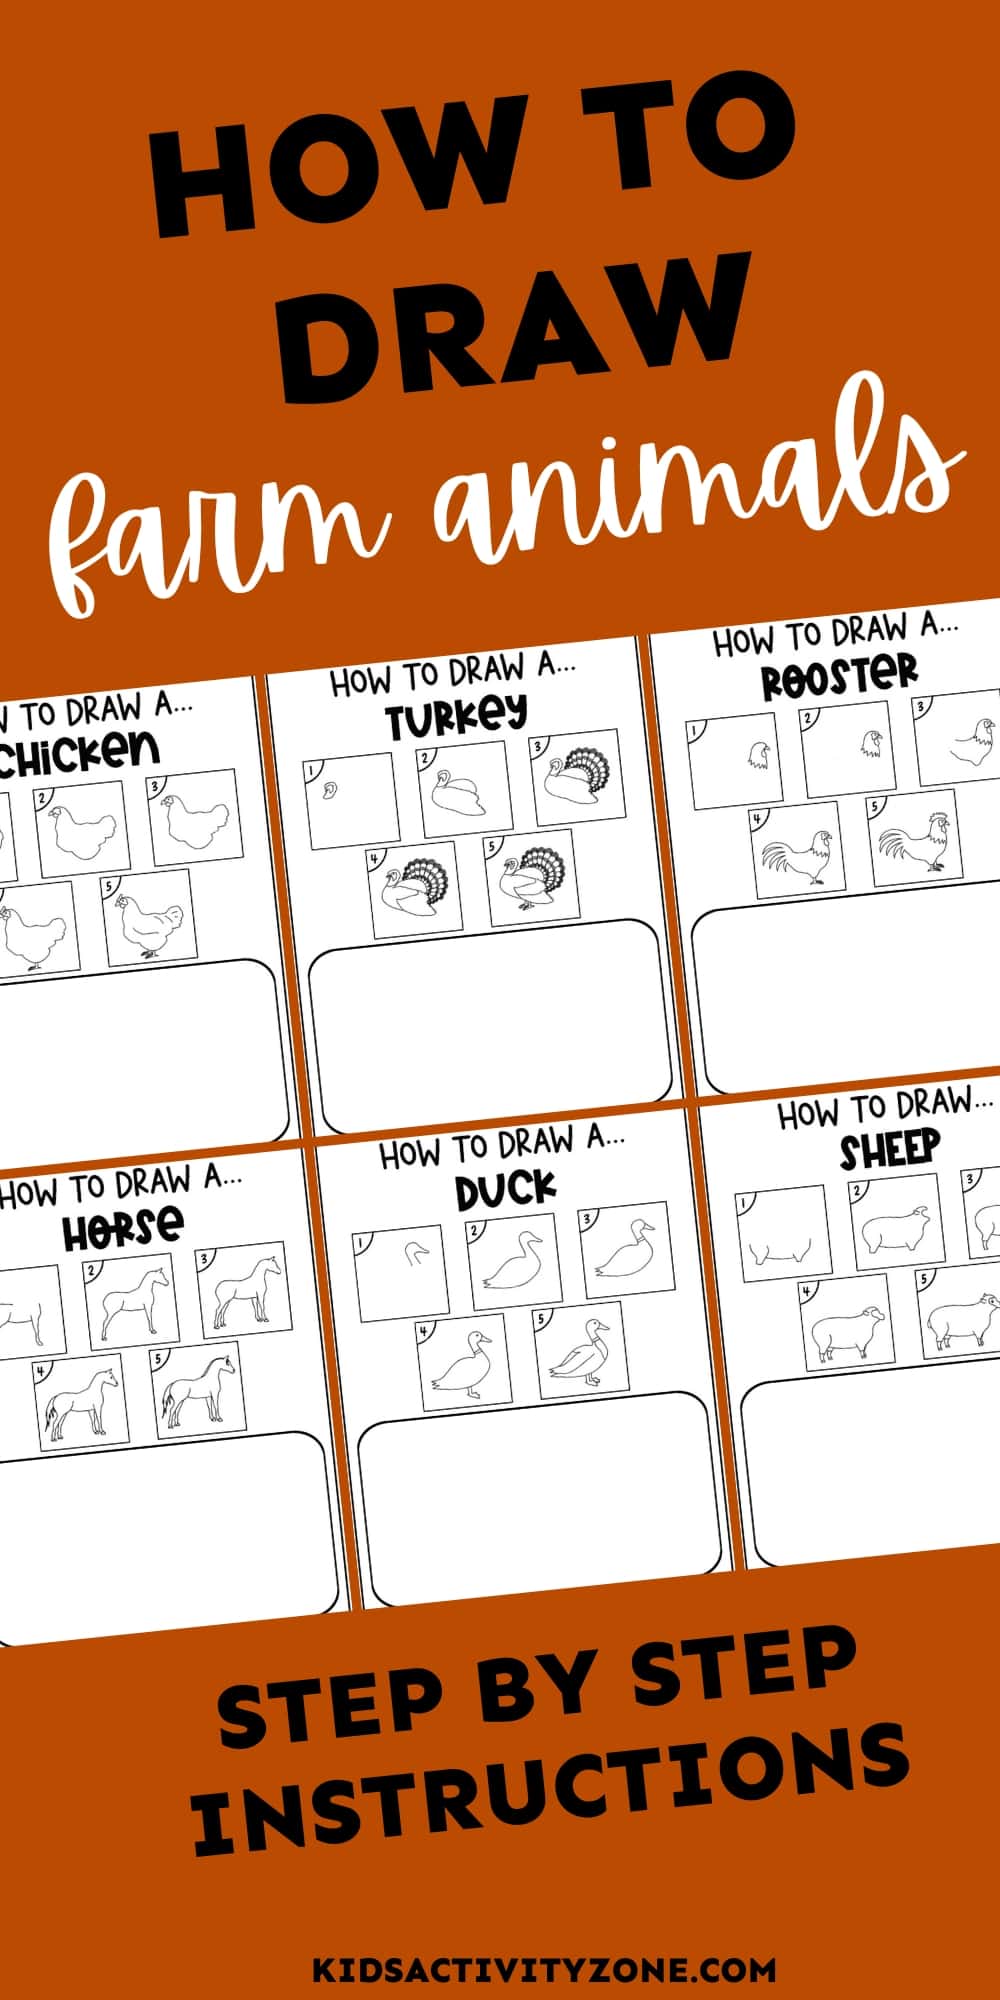 Want to learn how to draw farm animals? Grab this free printable showing you how to draw farm animals step by step. Animals that are included are a Chicken, Cow, Pig, Duck, Sheep, Rooster, Horse and Turkey!